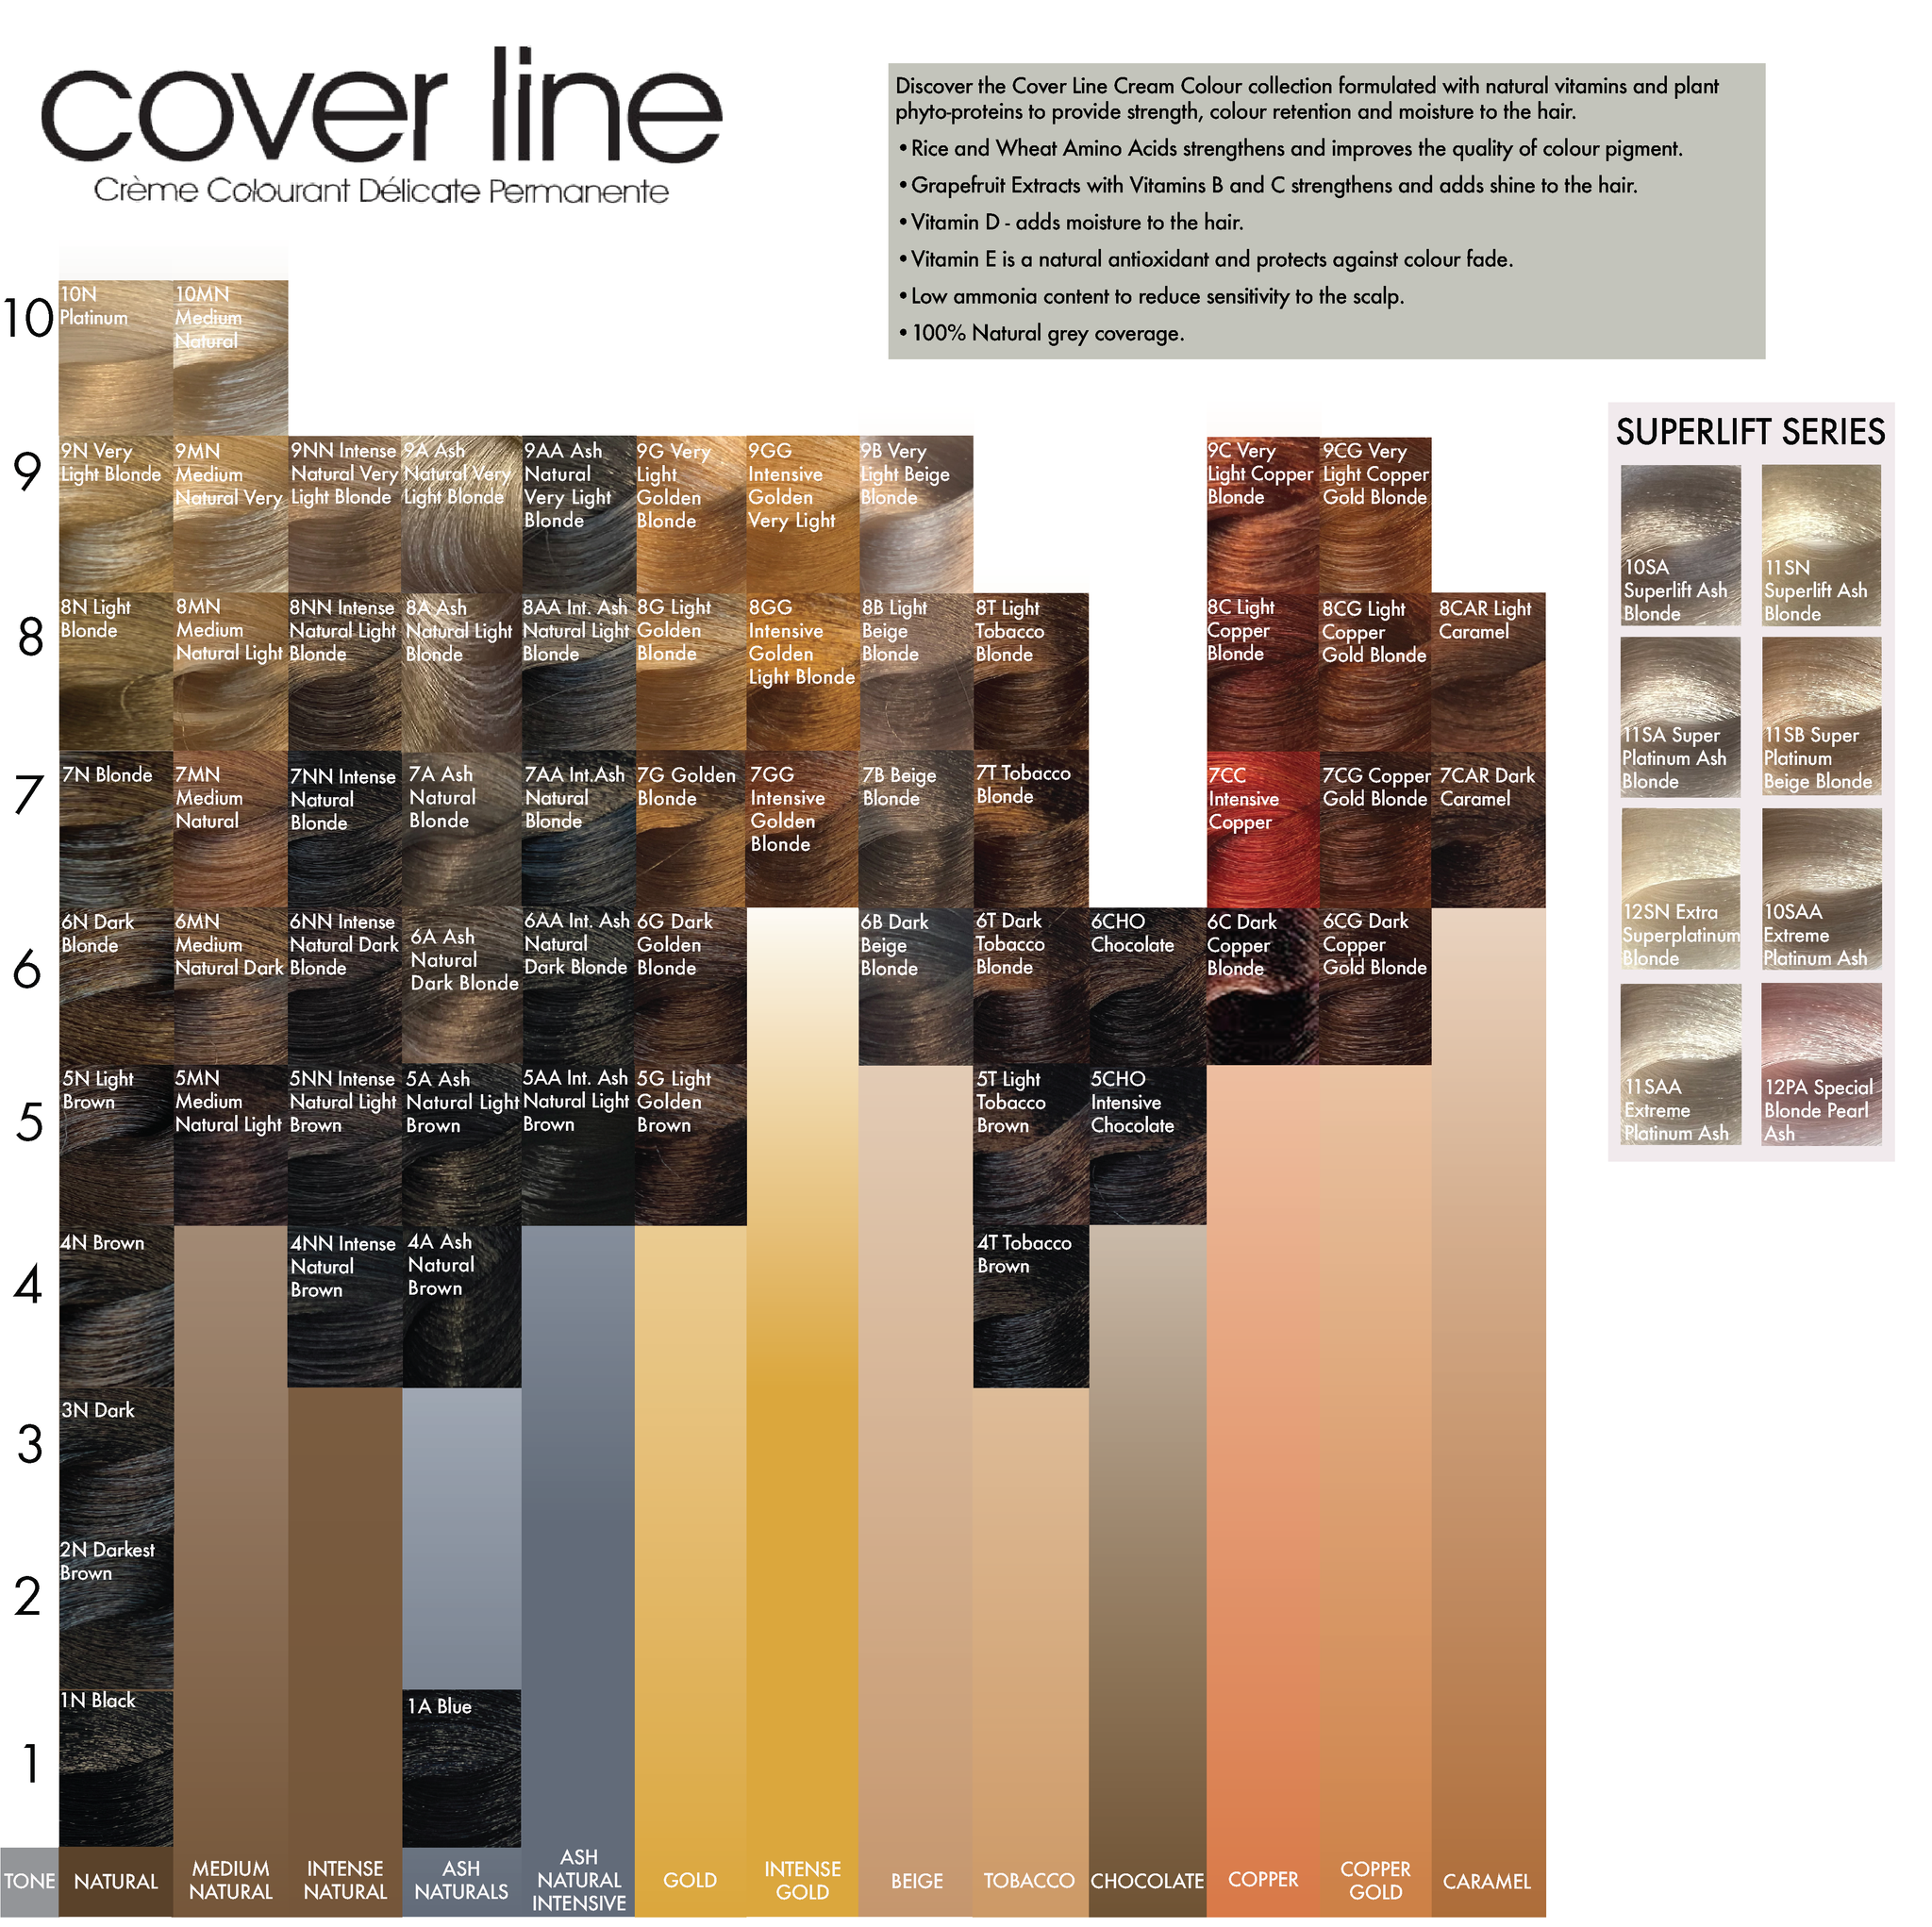 Coverline 5AA (5.11) Intensive Ash Natural Light Brown 100ml